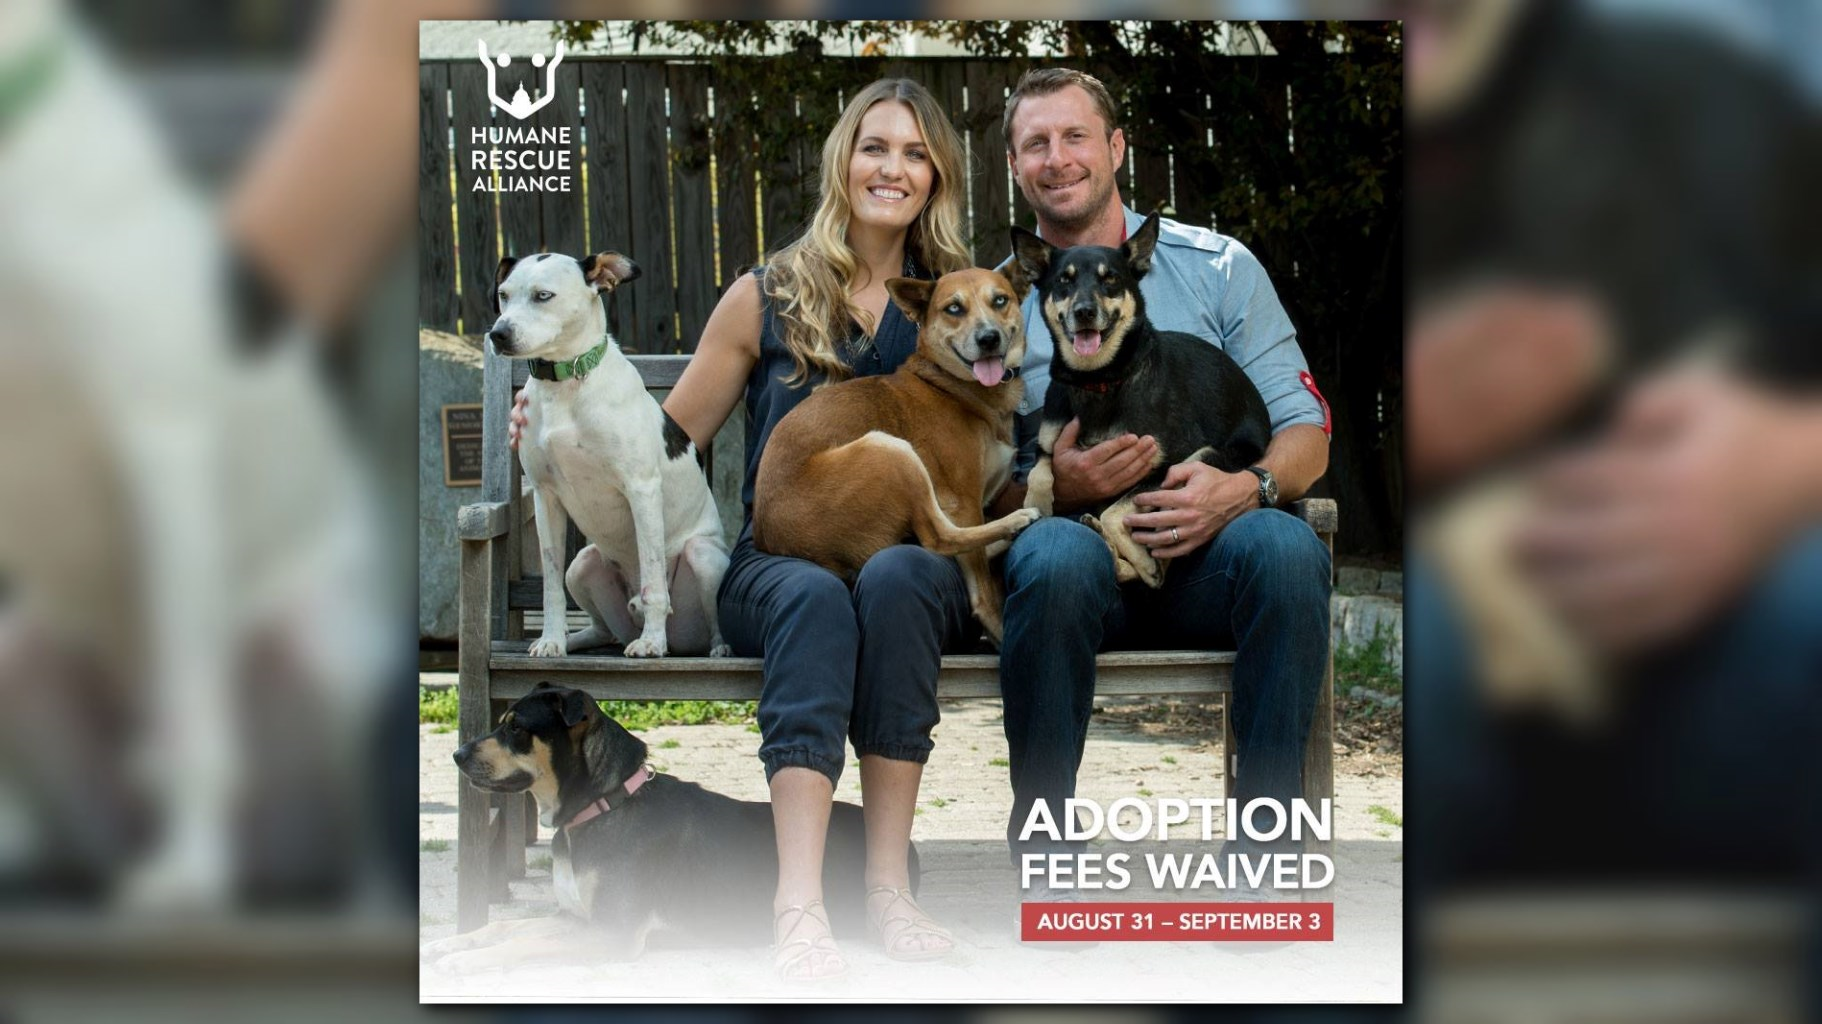 Nationals Pitcher Max Scherzer and His Wife, Erica, Will Cover Adoption  Fees at Humane Rescue Alliance This Weekend - Washingtonian